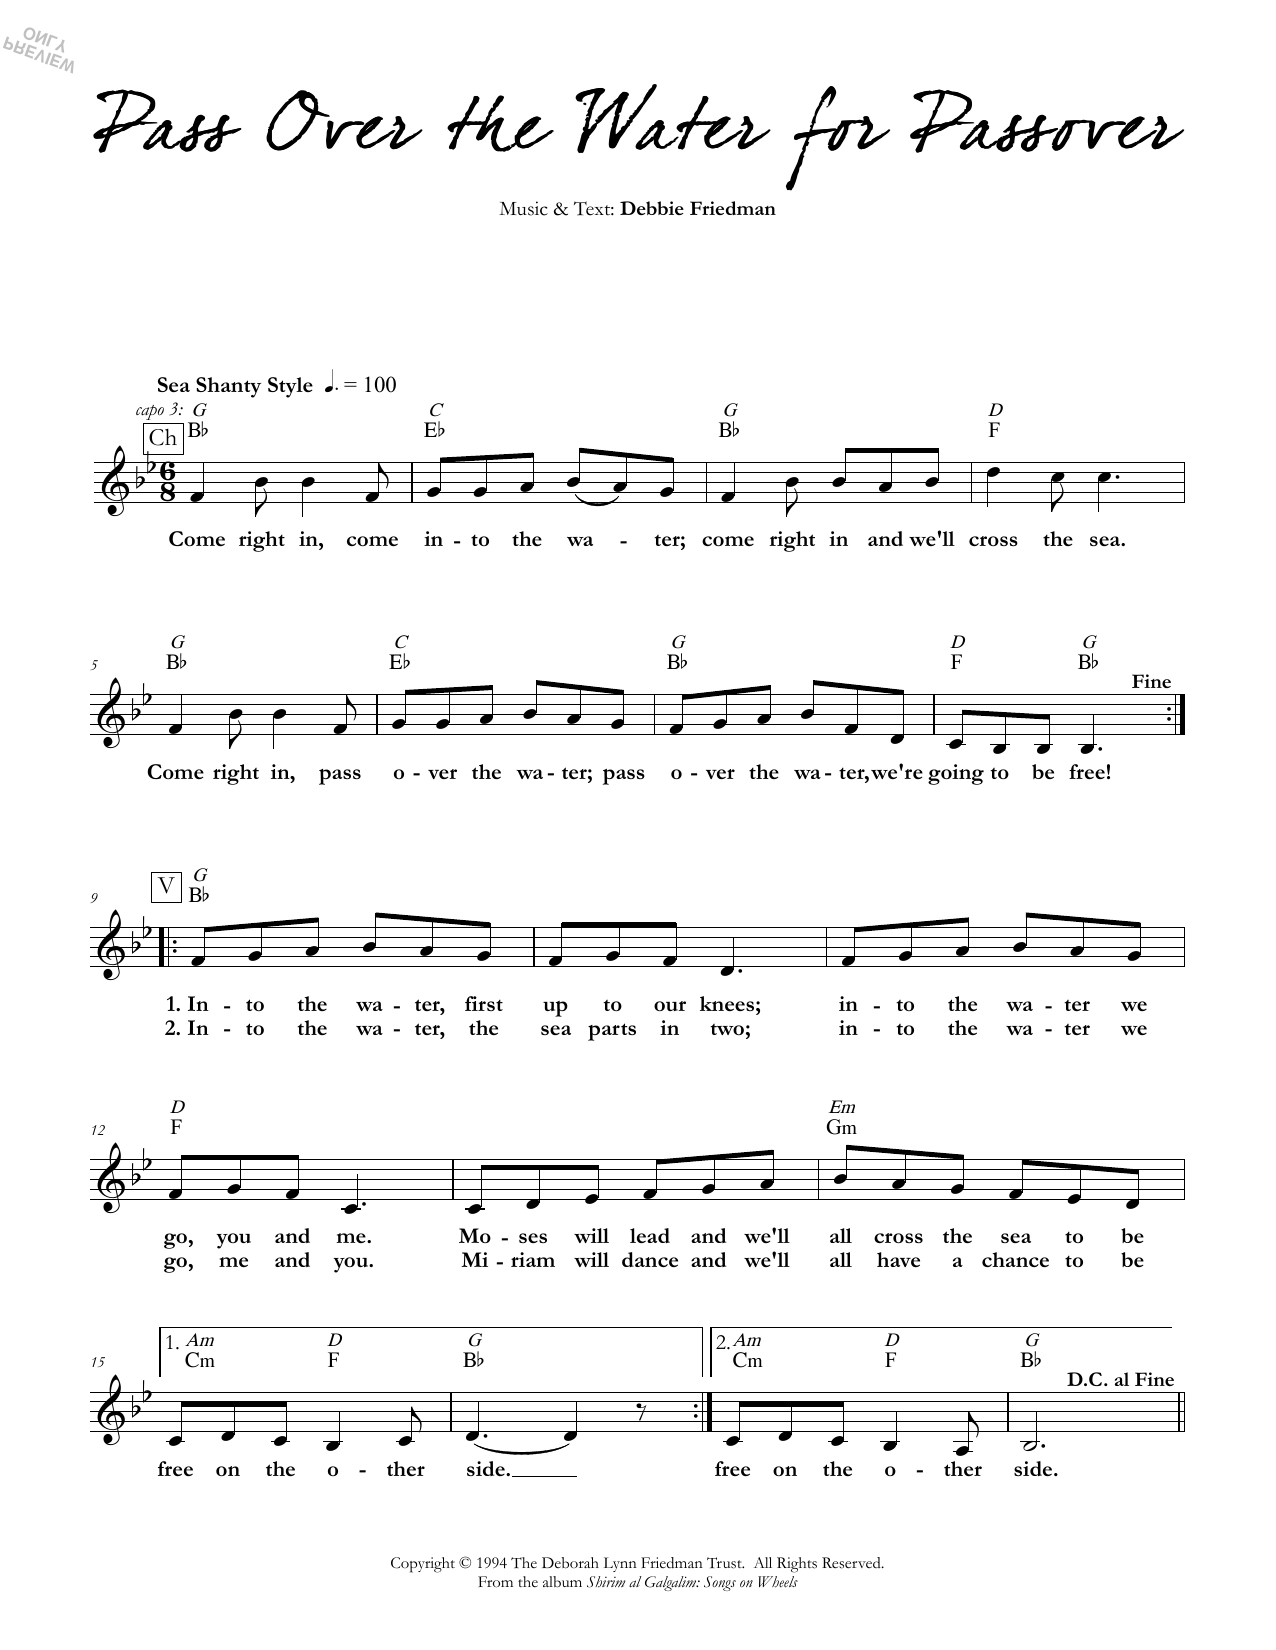 Download Debbie Friedman Pass Over the Water for Passover Sheet Music